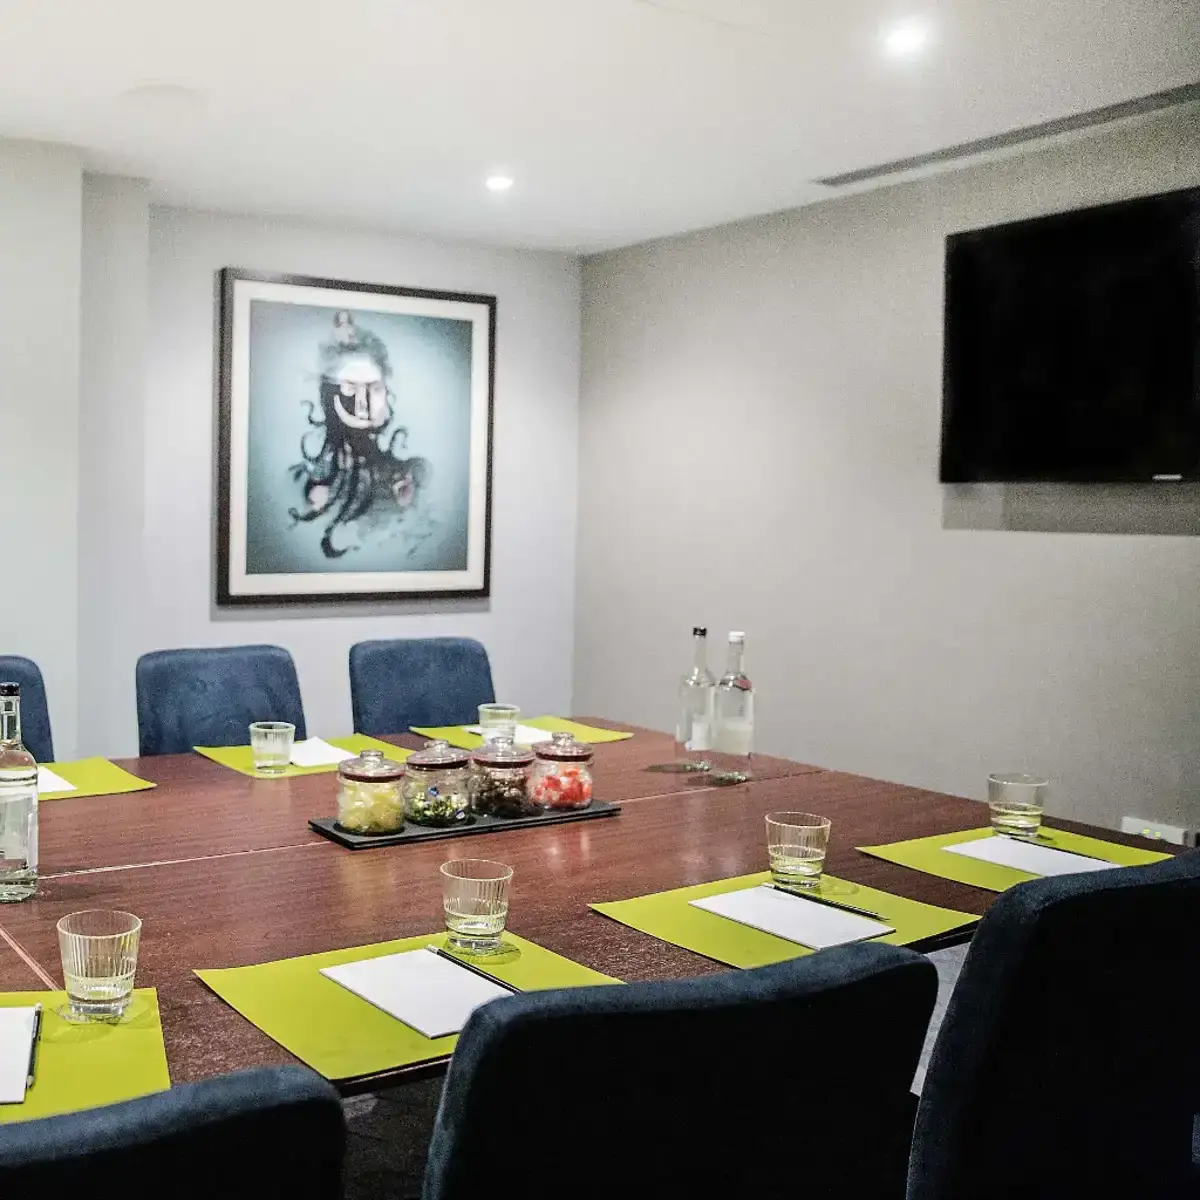 Malmaison Birmingham W+P Meeting room with table and seats visible, green place settings, writing pads, and feature jars of boiled sweets